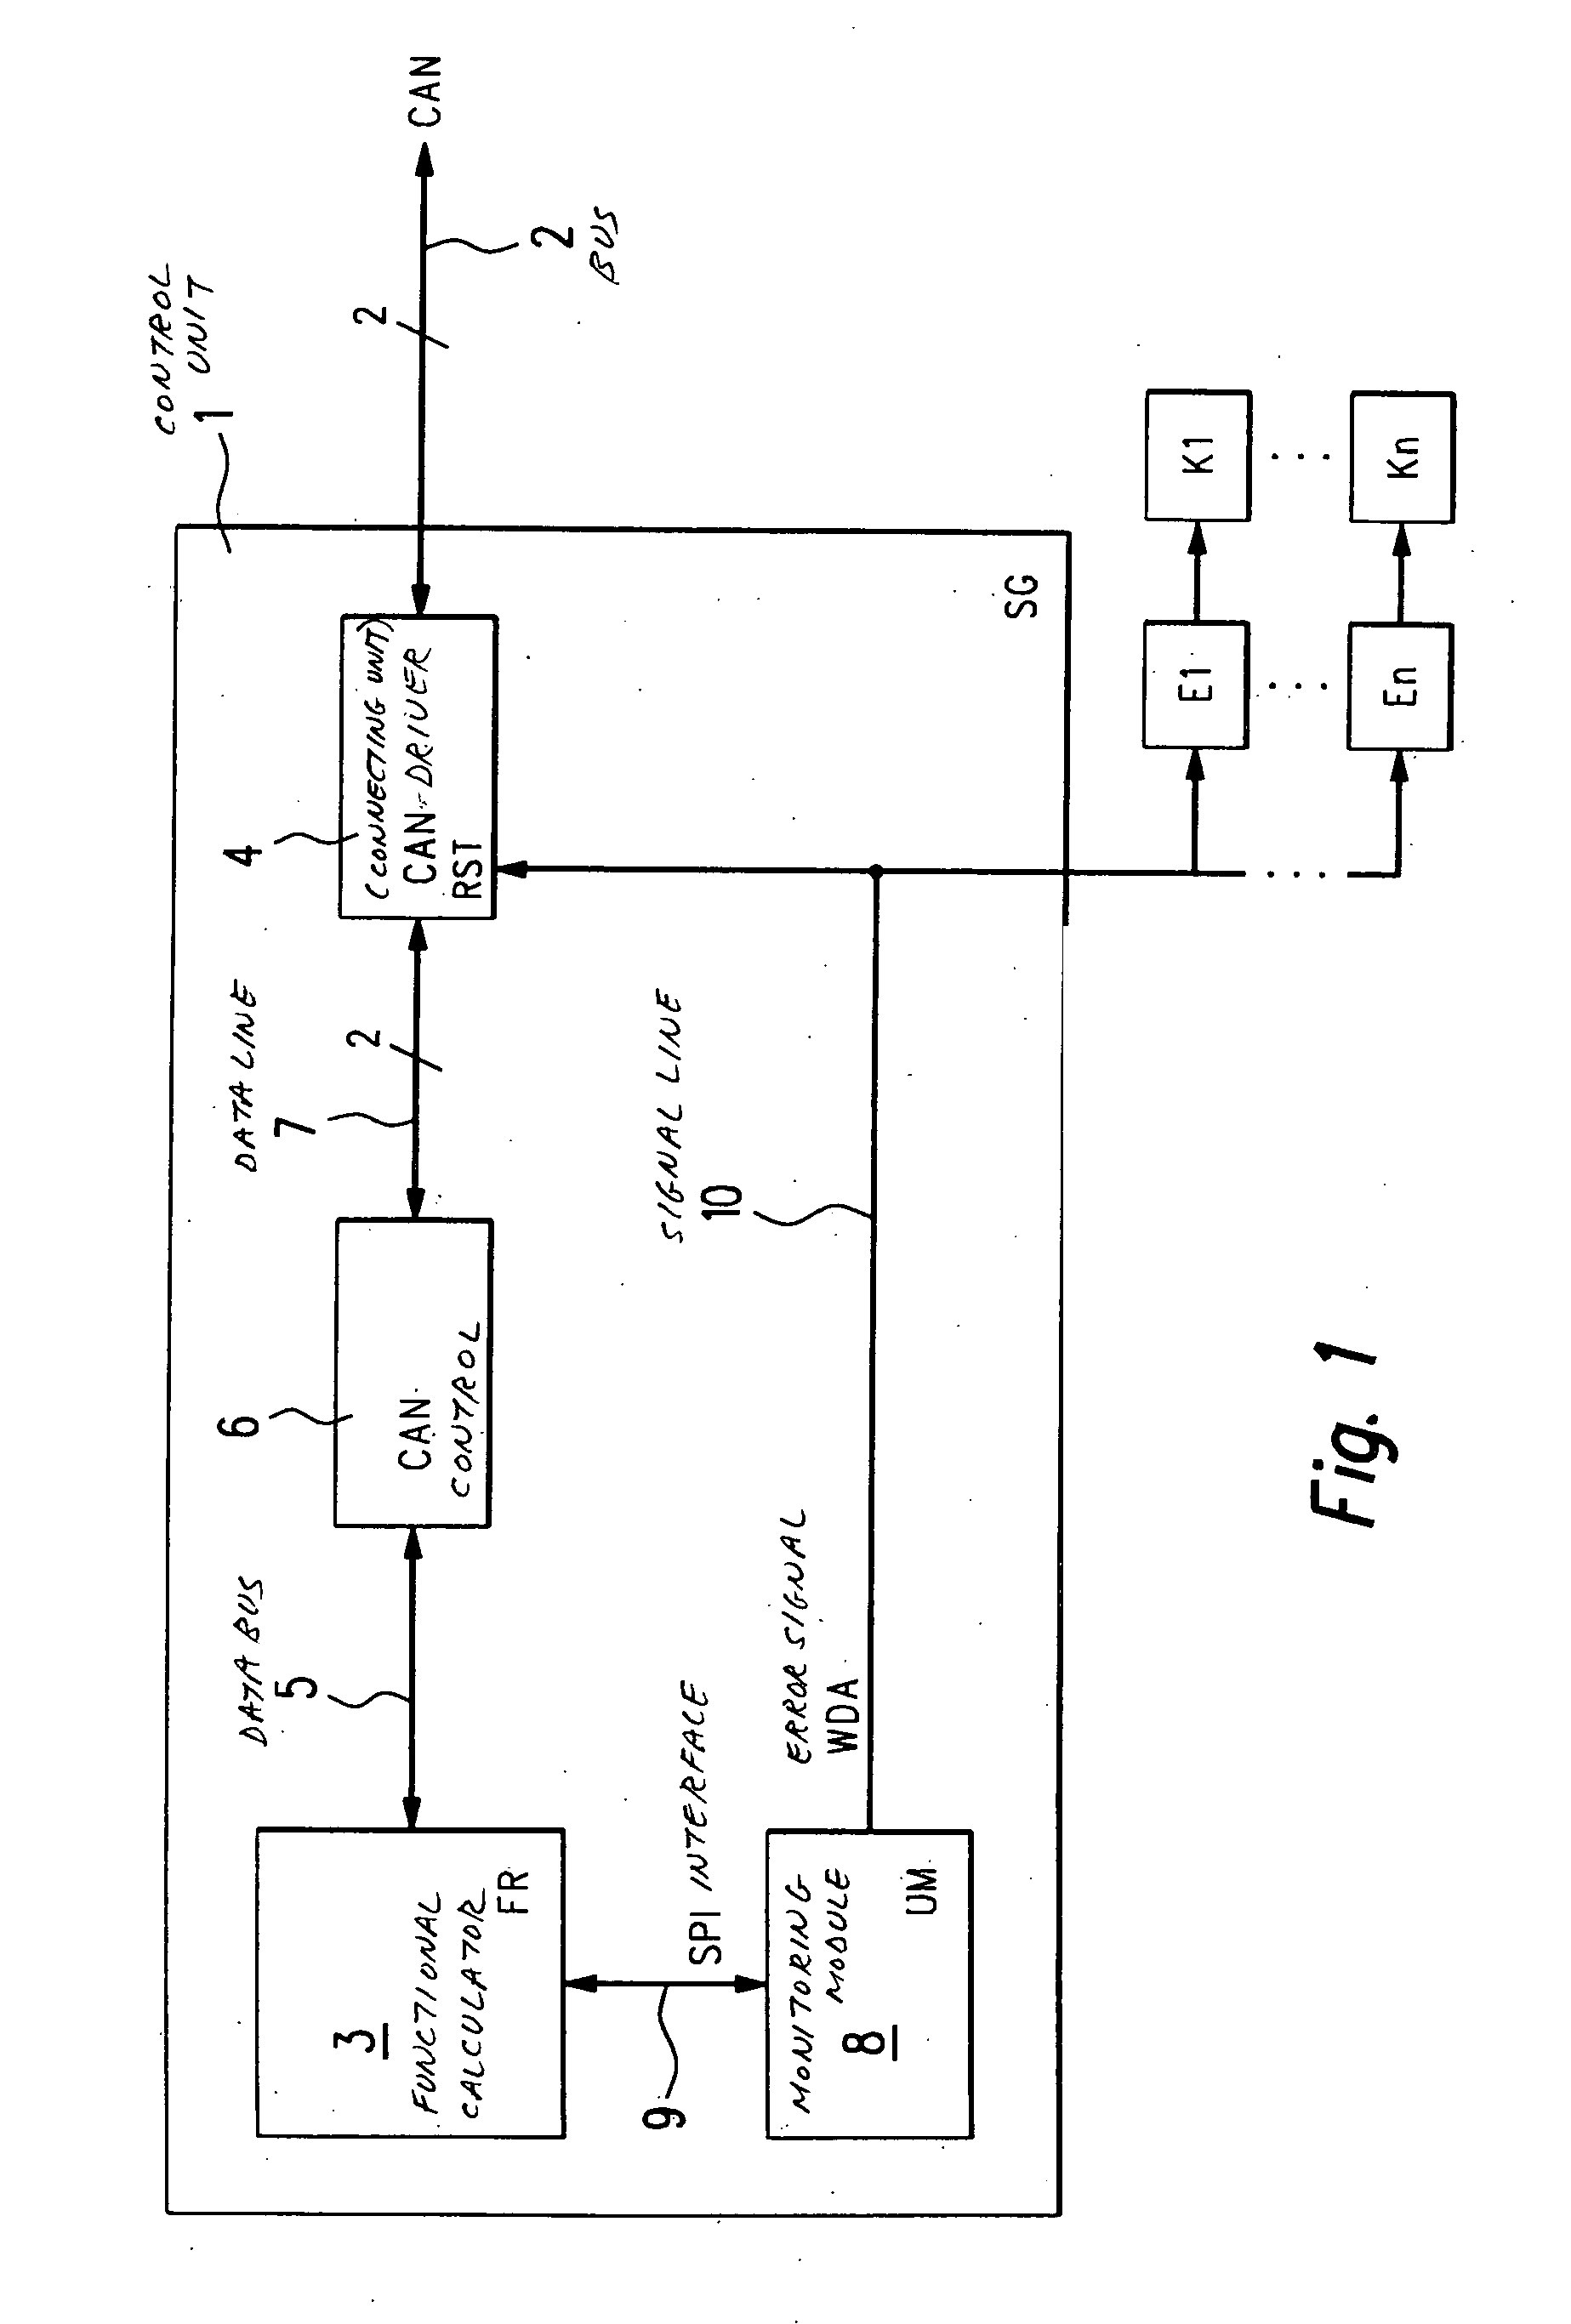 Method and device for controlling operational processes, especially in a vehicle